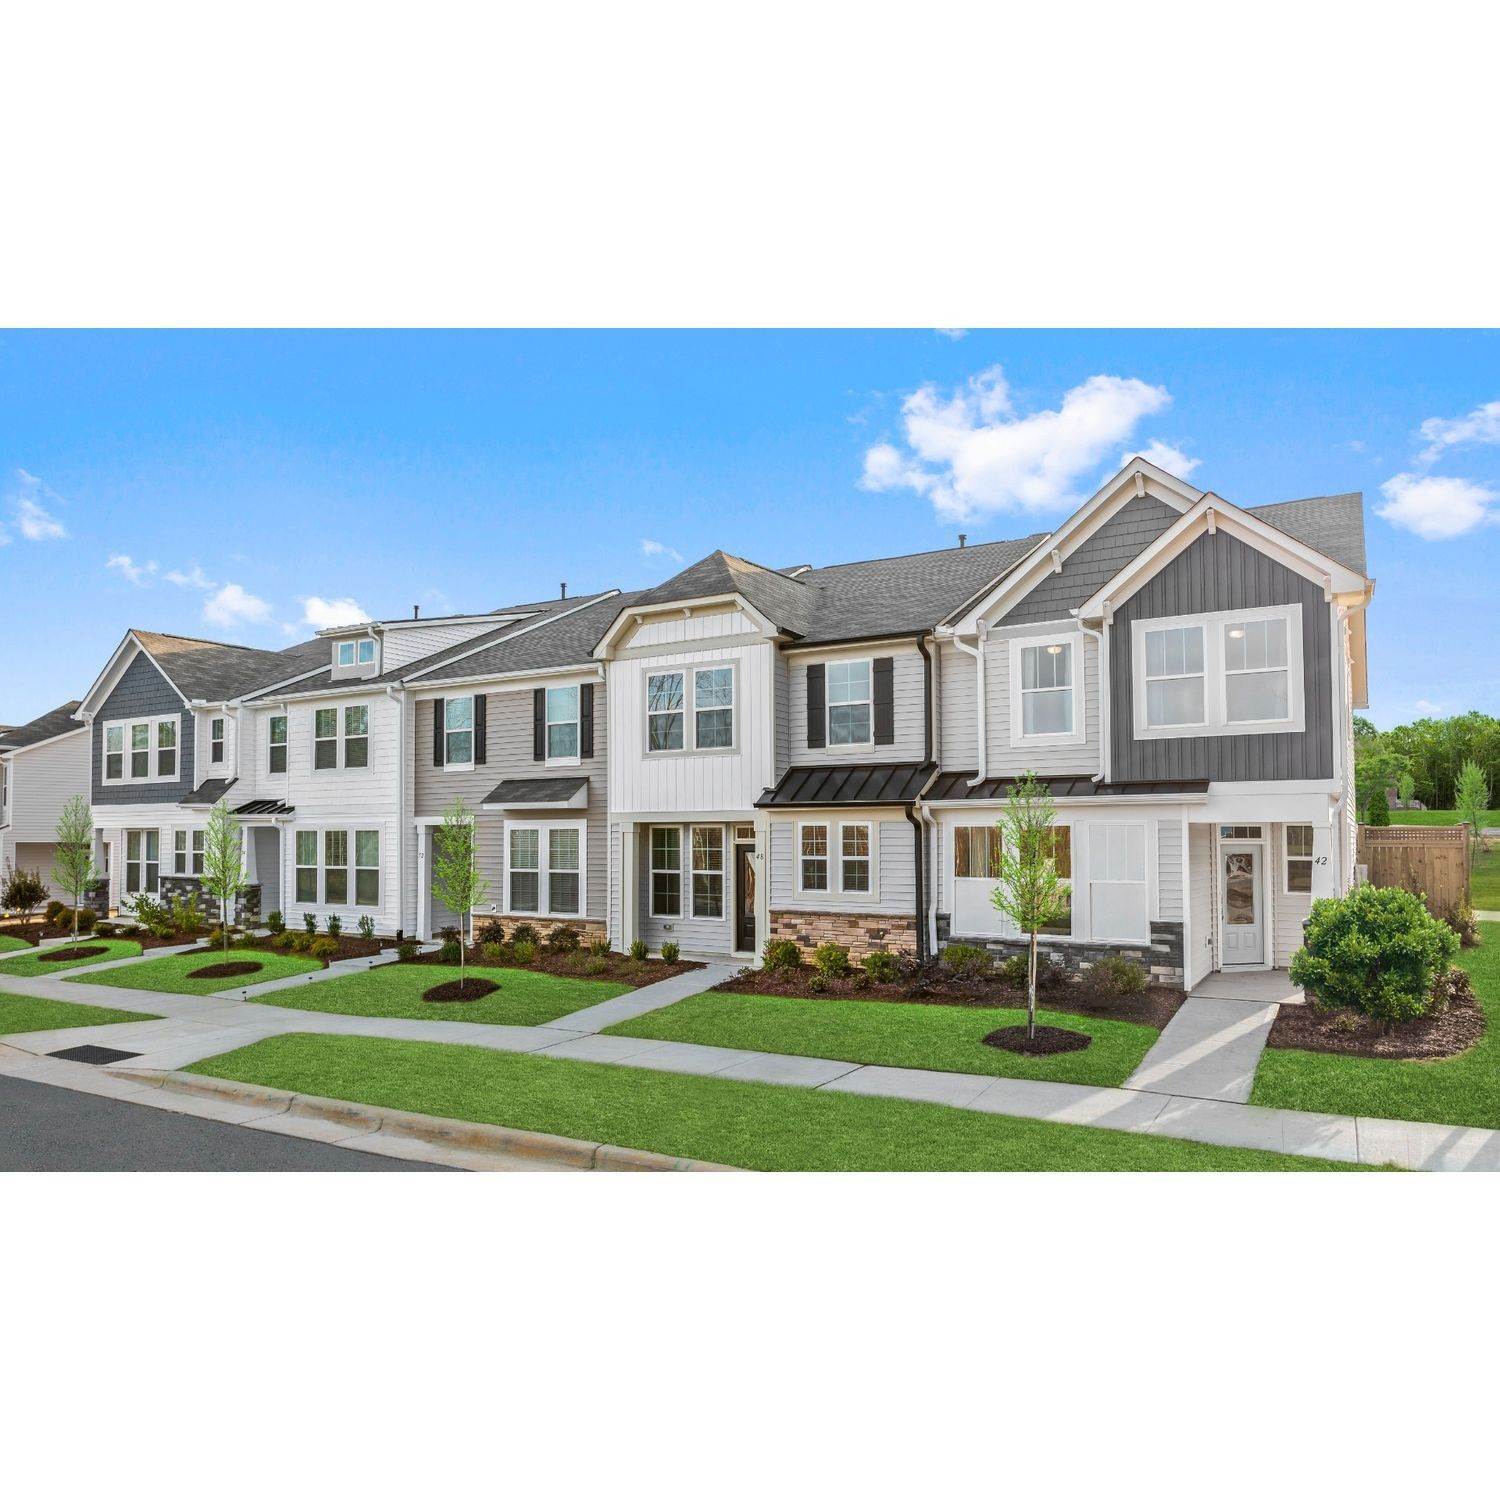 2. Meadow View xây dựng tại 42 Channel Drop Drive, Clayton, NC 27520